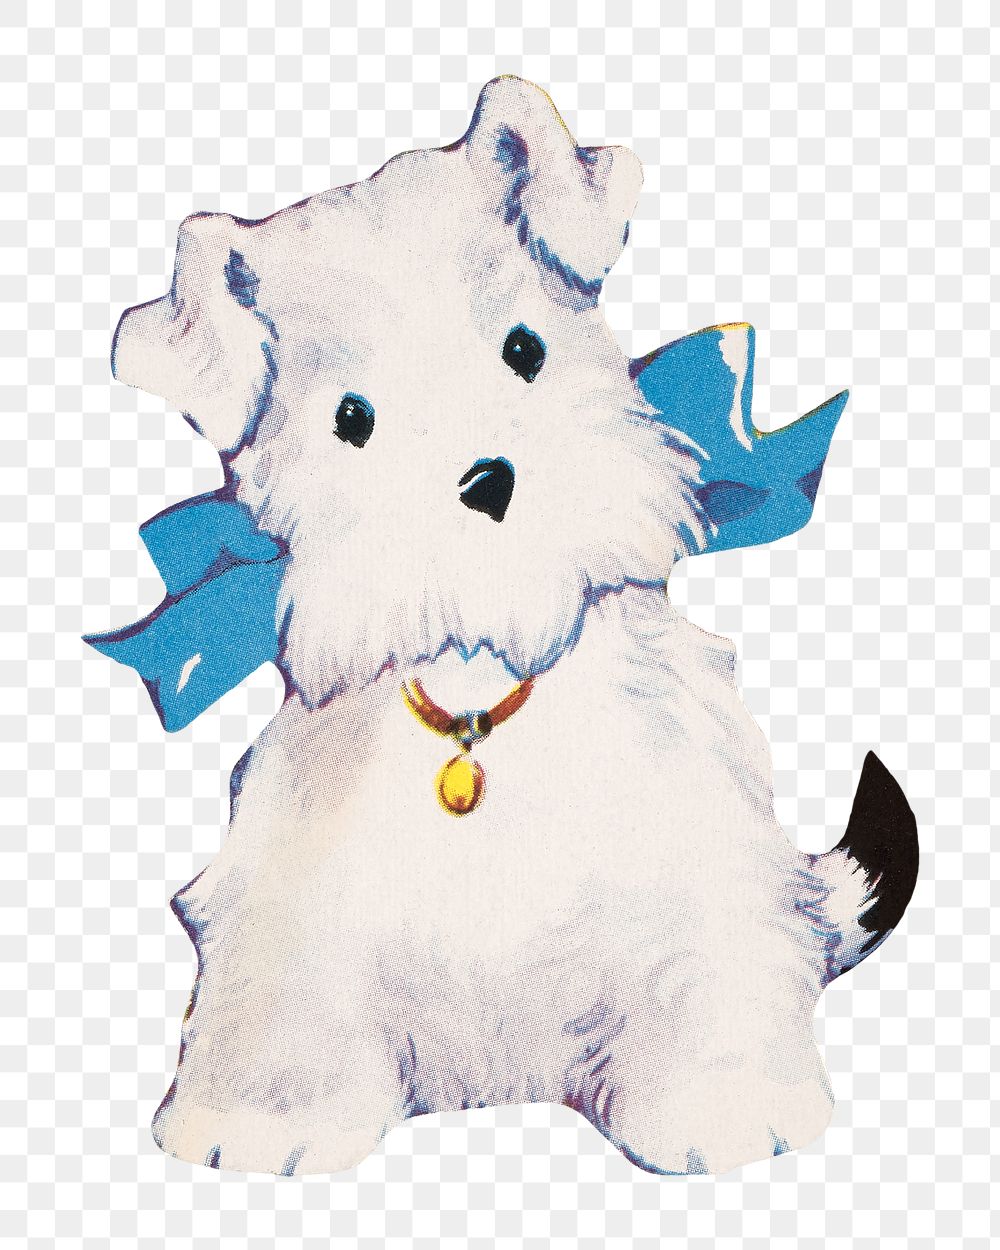 Dog png West Highland White Terrier, transparent background. Remixed by rawpixel.